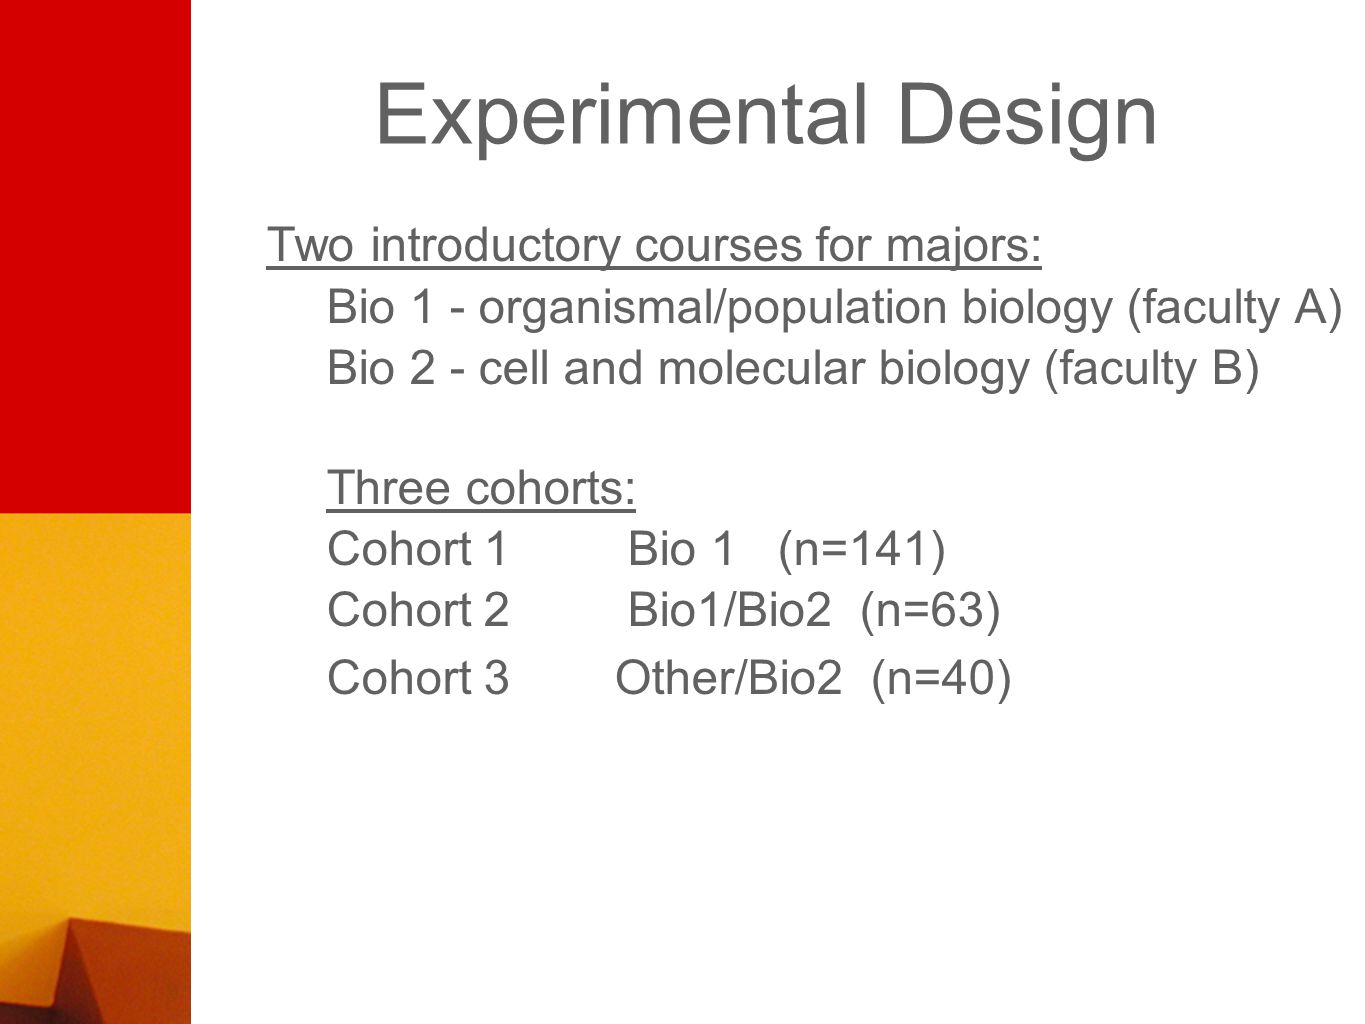 Experimental Design Two introductory courses for majors: Bio 1 - organismal/population biology (faculty A) Bio 2 - cell and molecular biology (faculty B) Three cohorts: Cohort 1 Bio 1 (n=141) Cohort 2 Bio1/Bio2 (n=63) Cohort 3 Other/Bio2 (n=40)